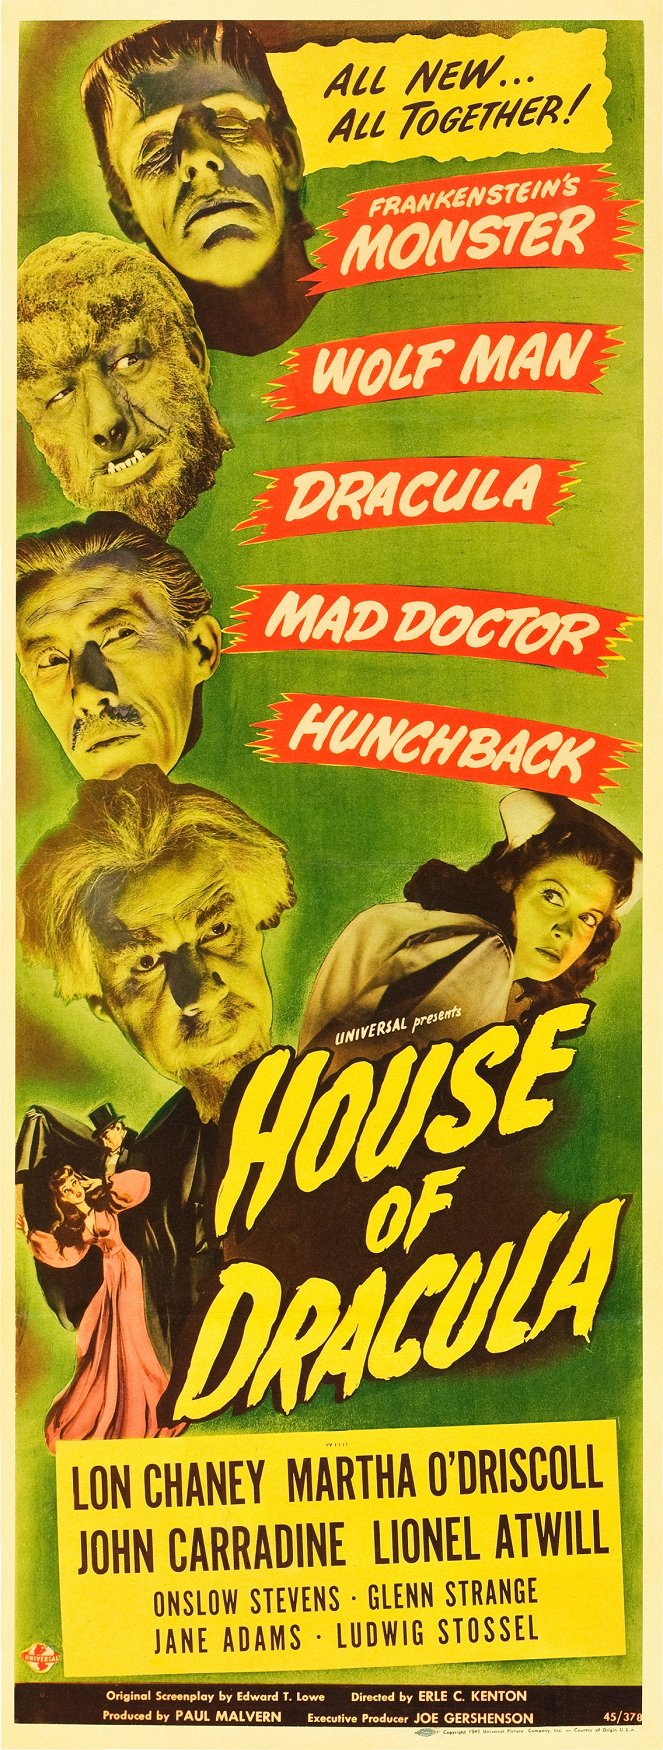 House of Dracula - Posters